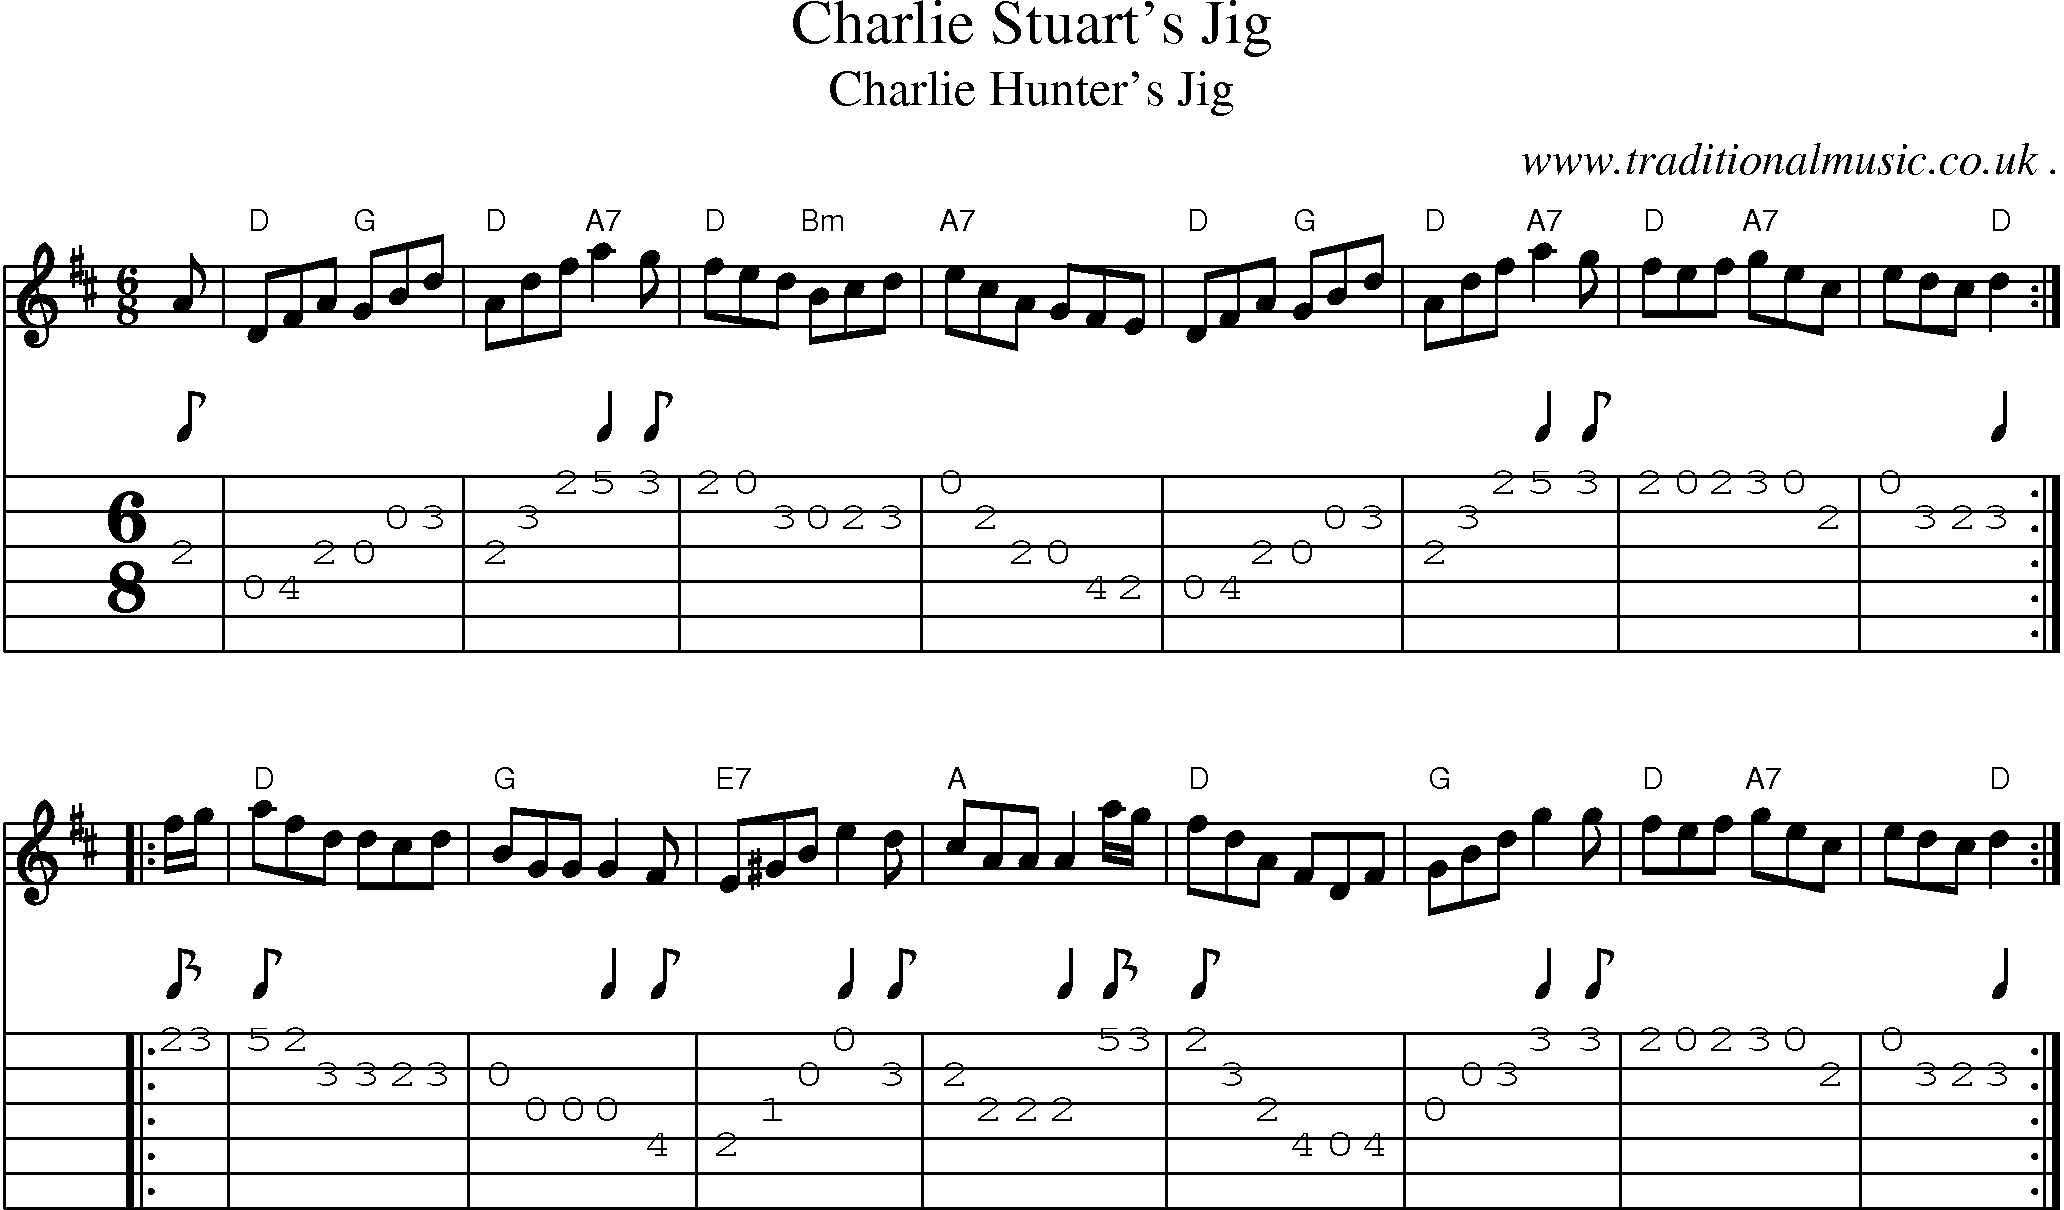 Sheet-music  score, Chords and Guitar Tabs for Charlie Stuarts Jig